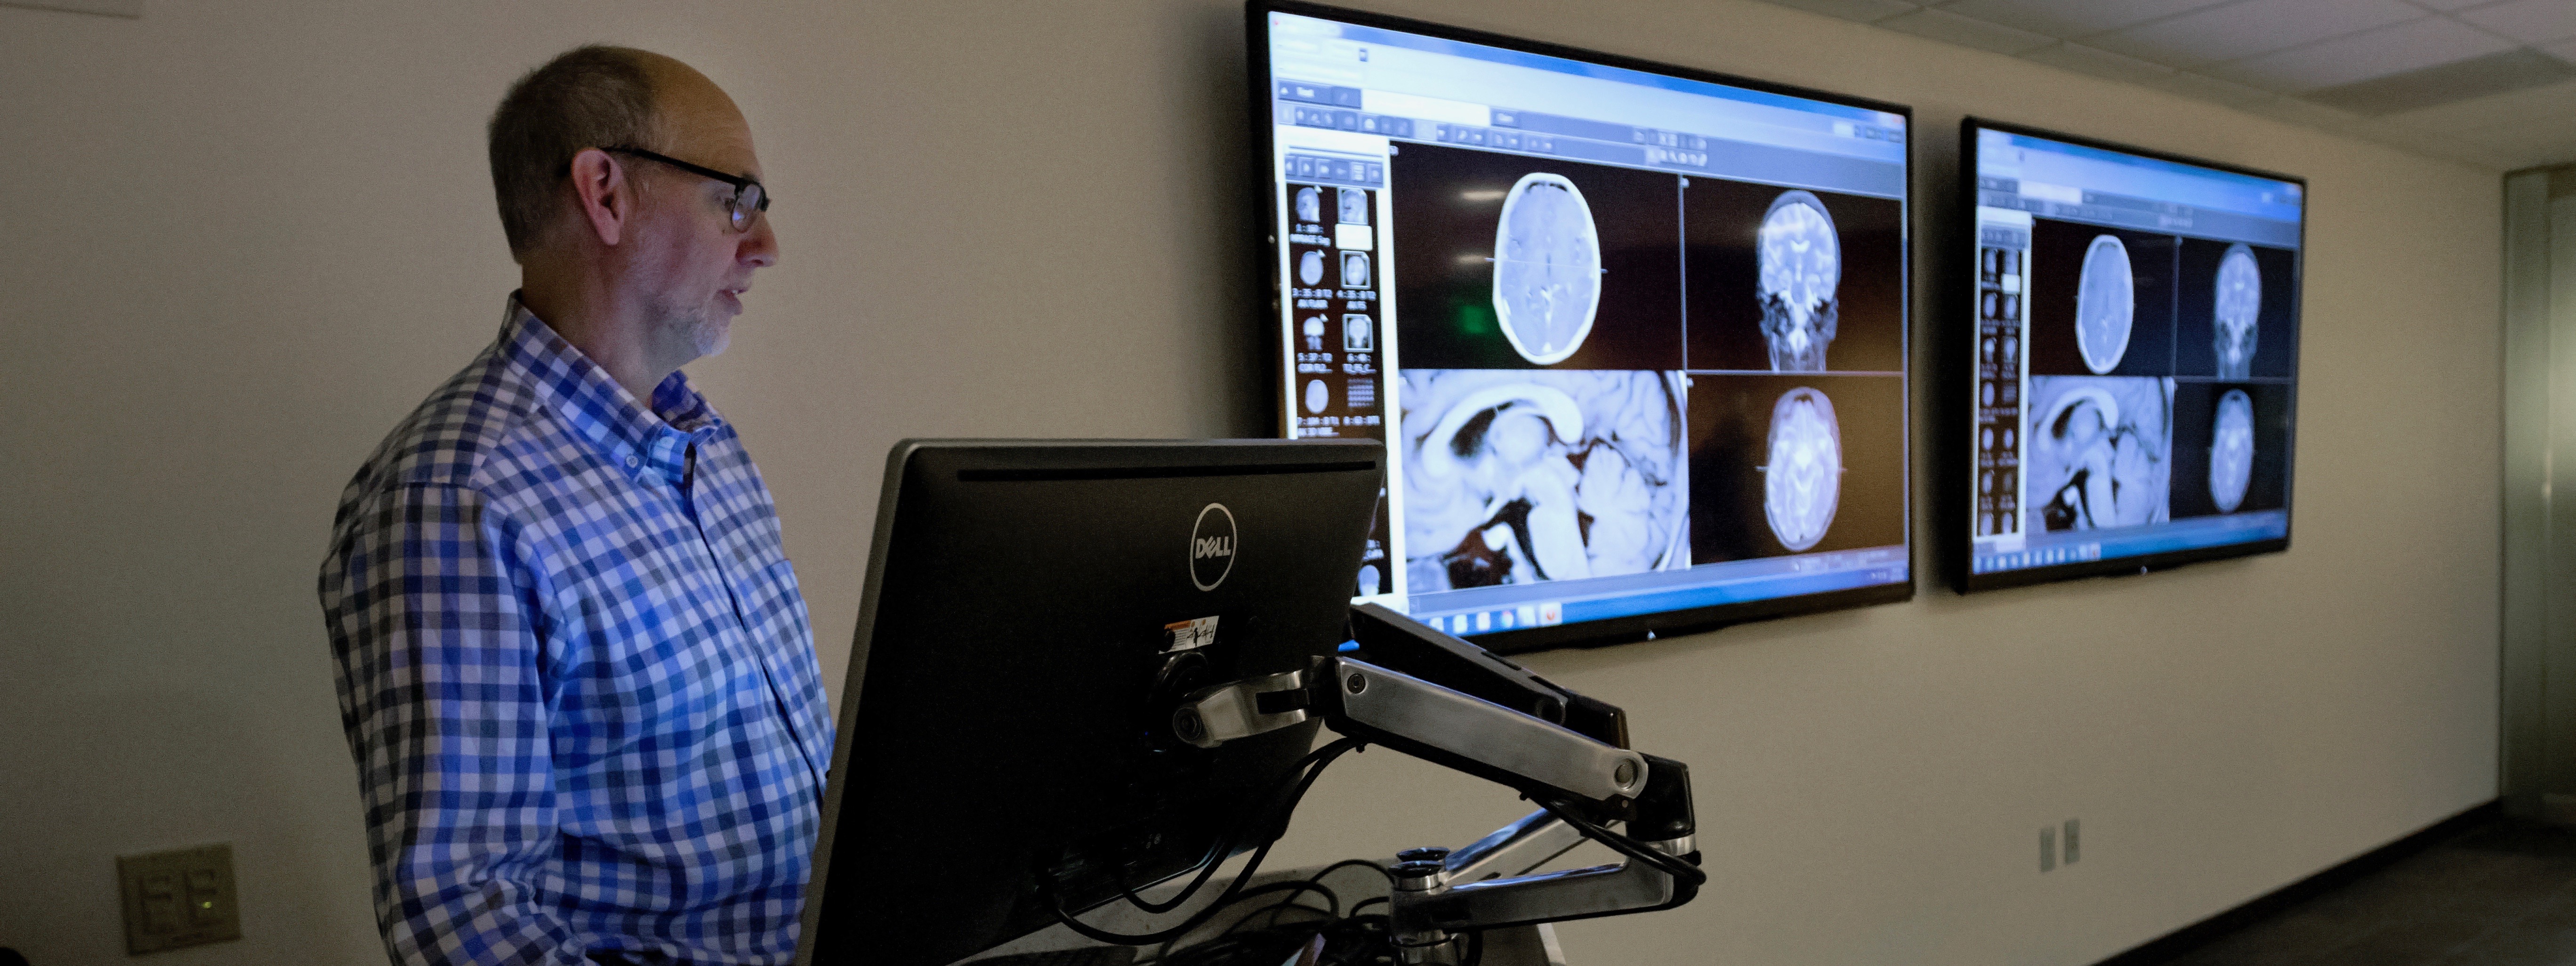 Dr. James Anderson, a neuroradiologist, shares an MRI scan and his expertise at a weekly Pediatric Brain Tumor Board